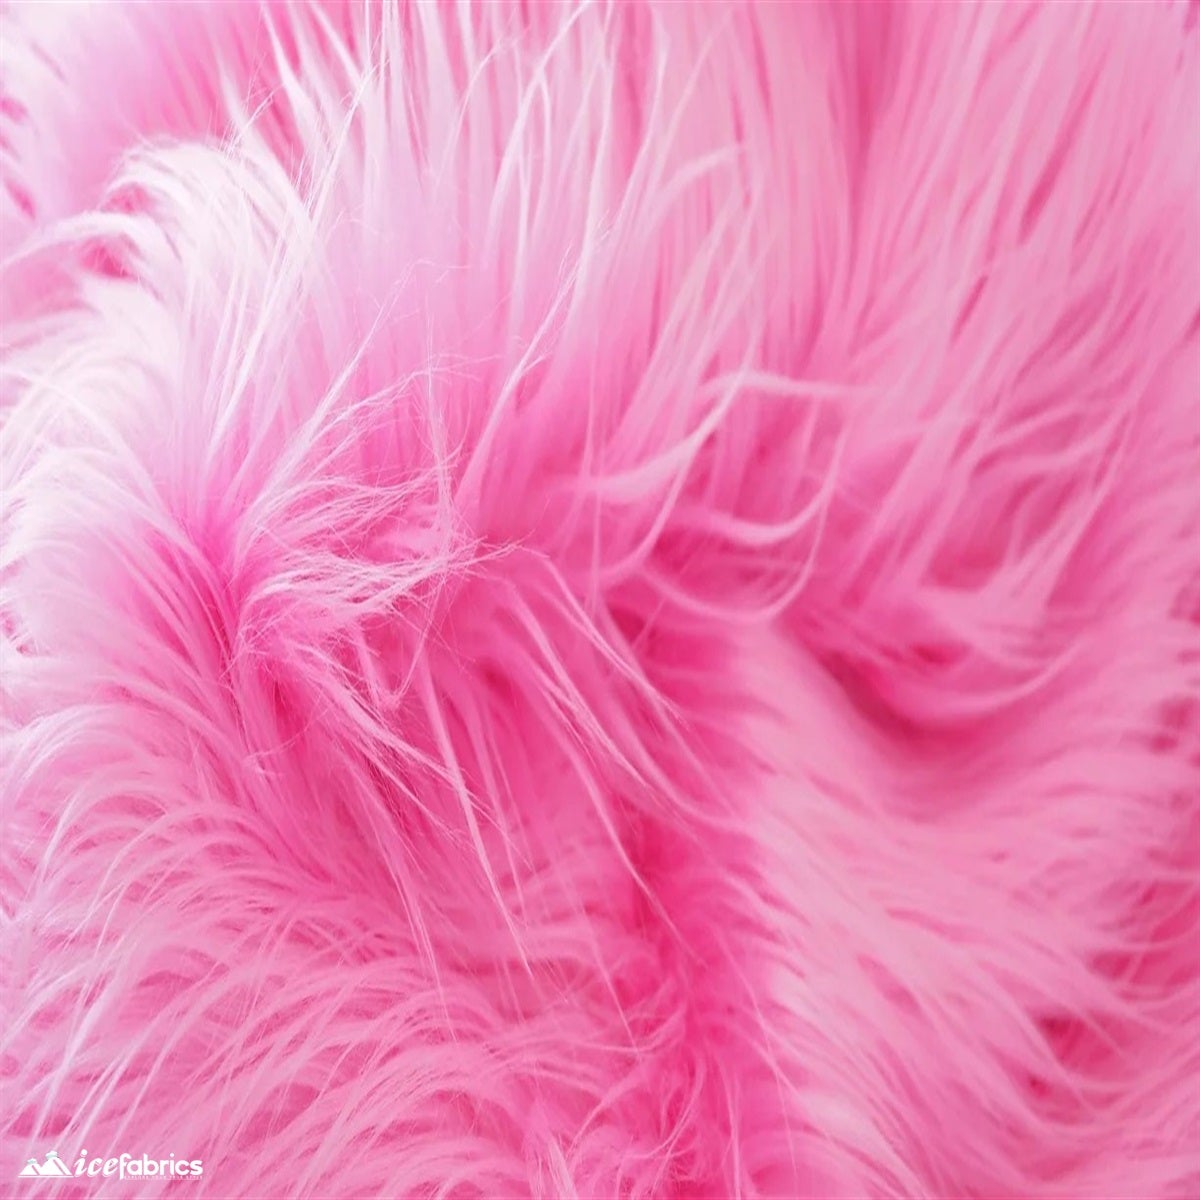 Mohair Faux Fur Fabric By The Roll (20 Yards) 4 Inch PileICE FABRICSICE FABRICSHot PinkBy The Roll (60" Wide)Mohair Faux Fur Fabric By The Roll (20 Yards) 4 Inch Pile ICE FABRICS